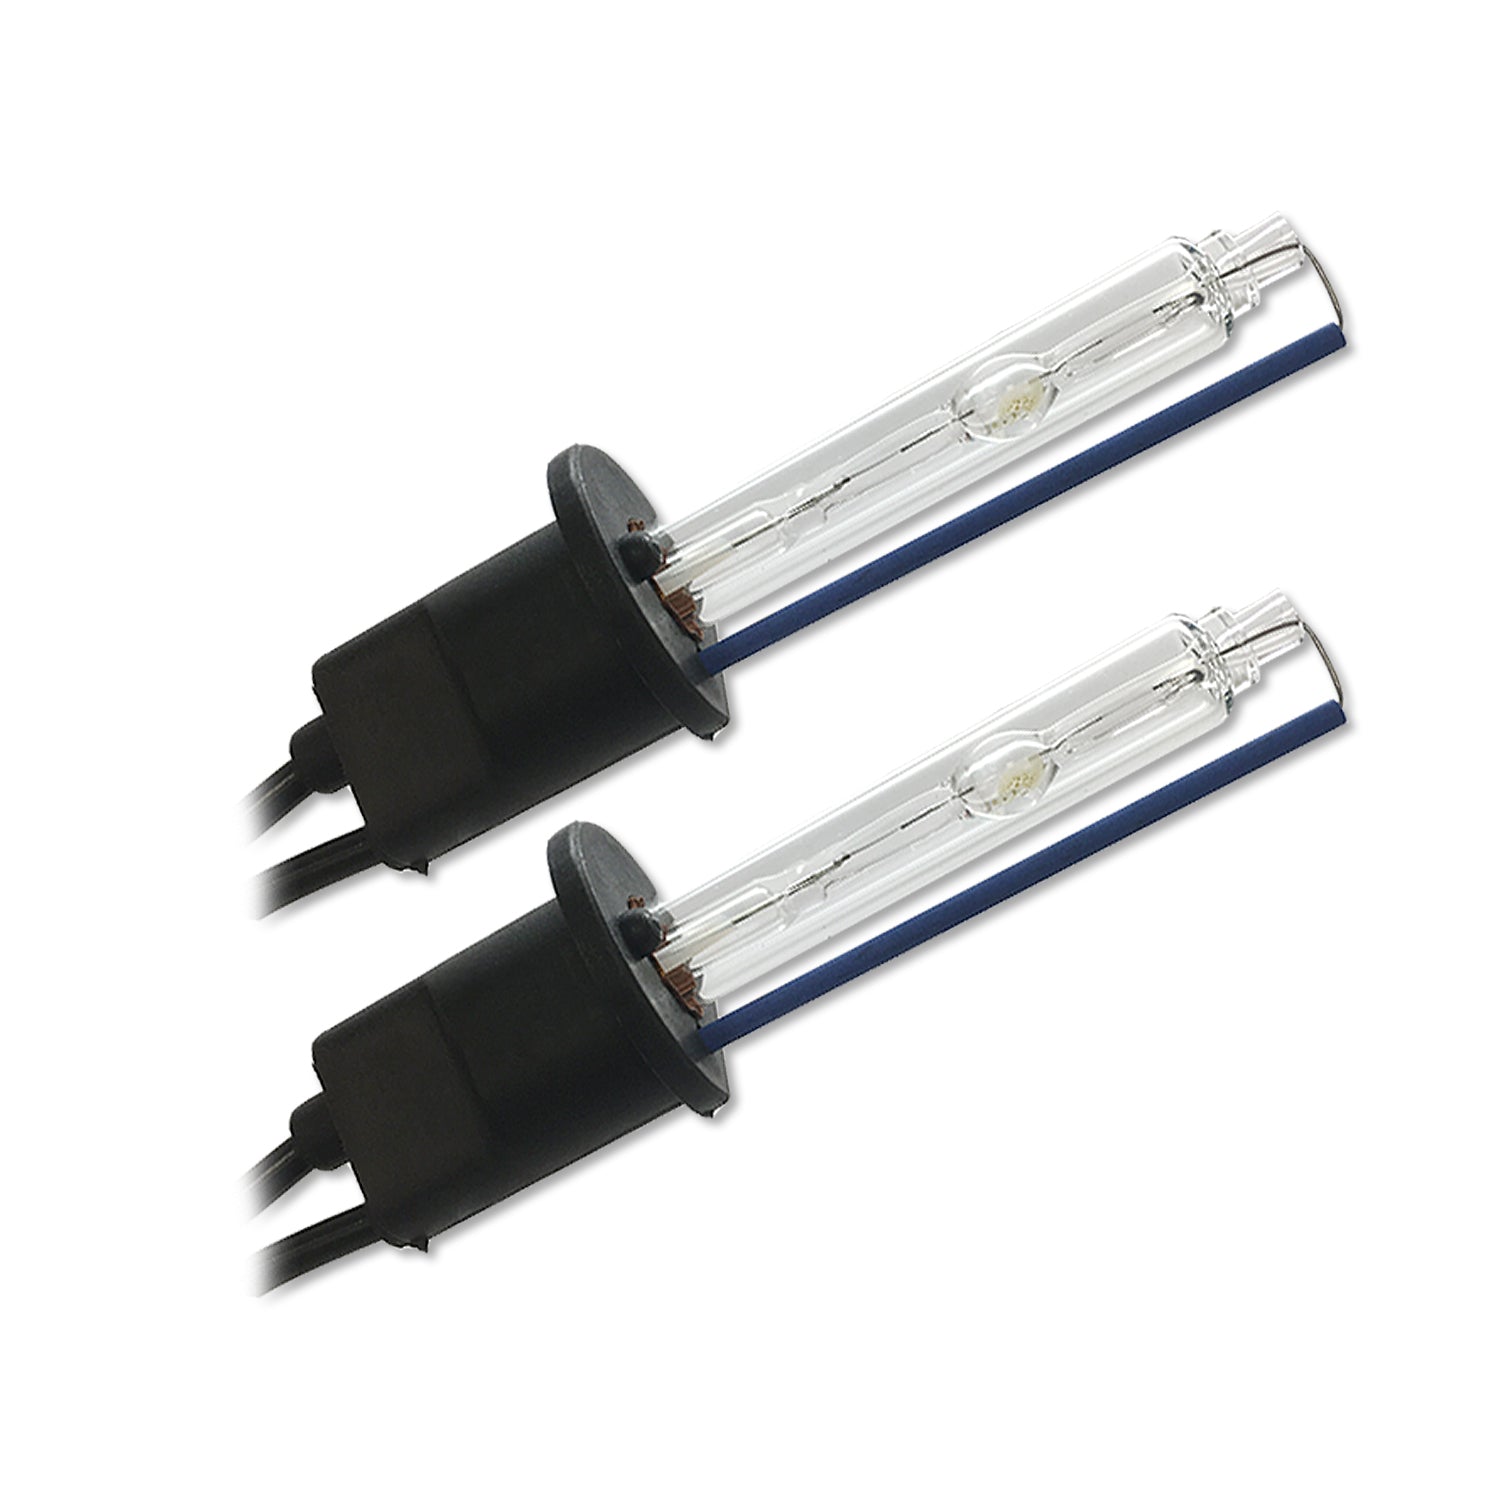 OSRAM LEDriving HL, ≜H1, LED-H1 replacement for conventional H1 high beam  lamps, offroad use only, Folding Box (2 lamps)